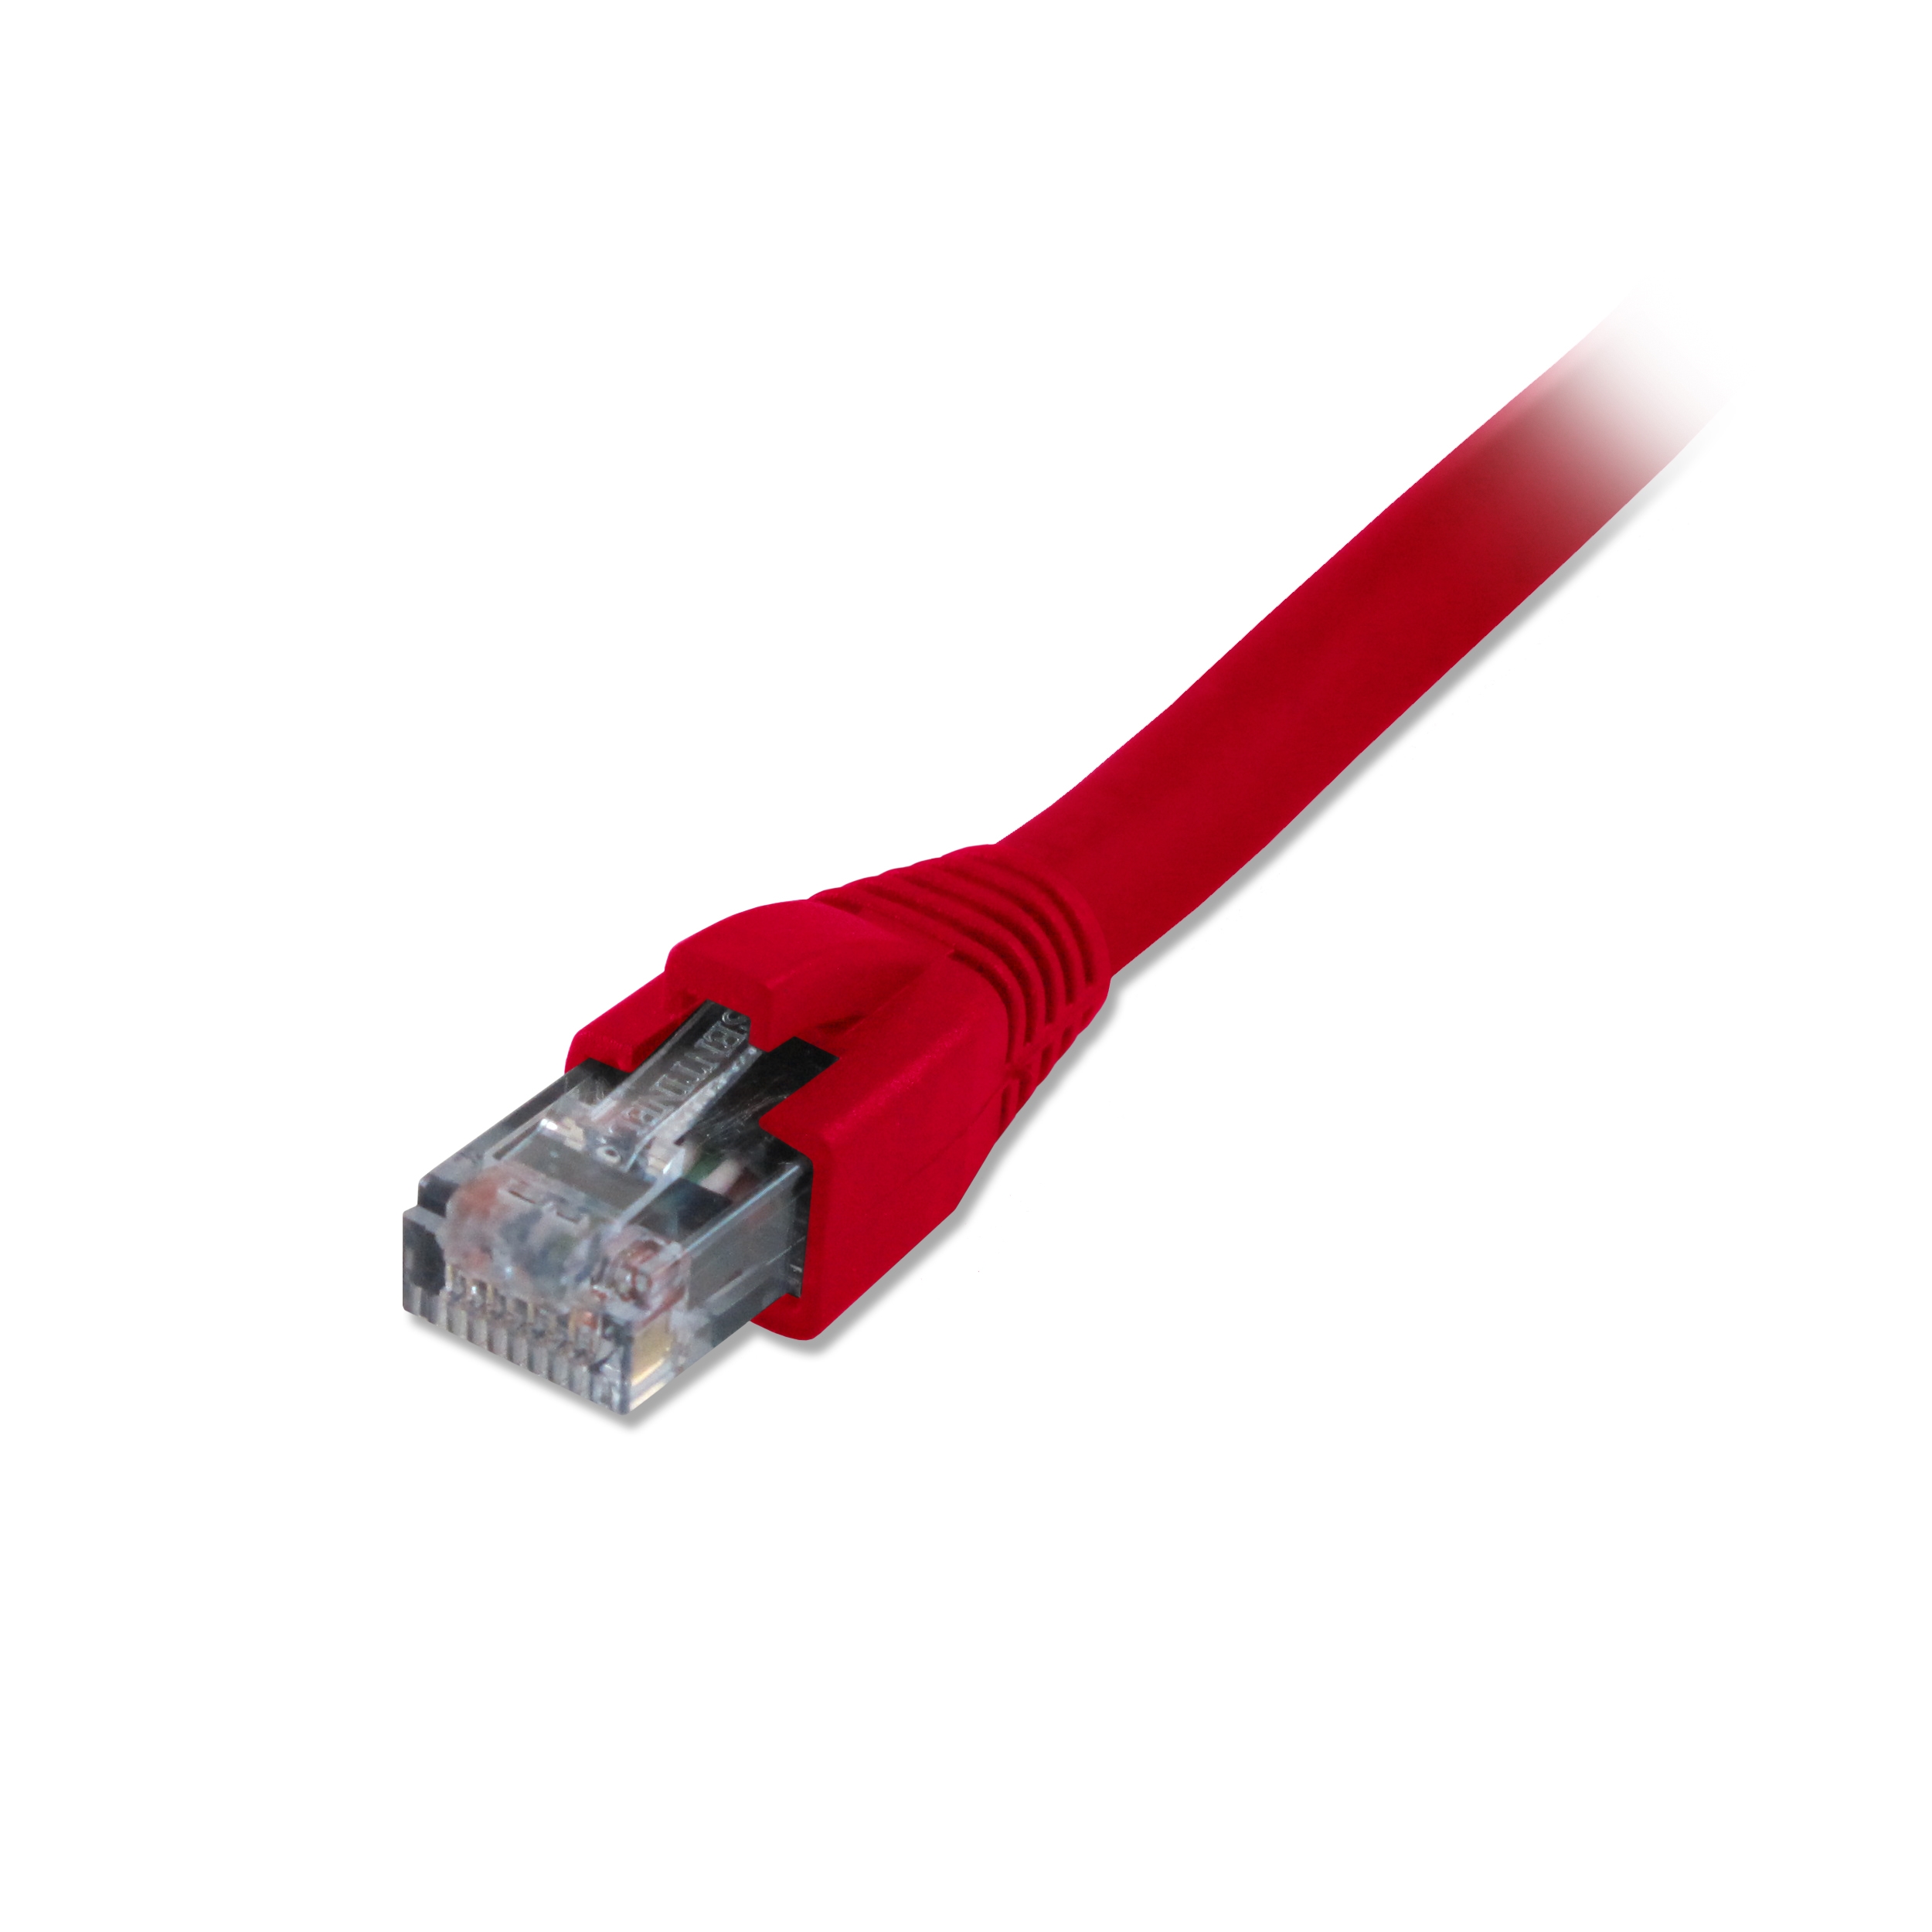 Comprehensive CAT5-350-1RED Cat5e 350 Mhz Snagless Patch Cable 1ft Red